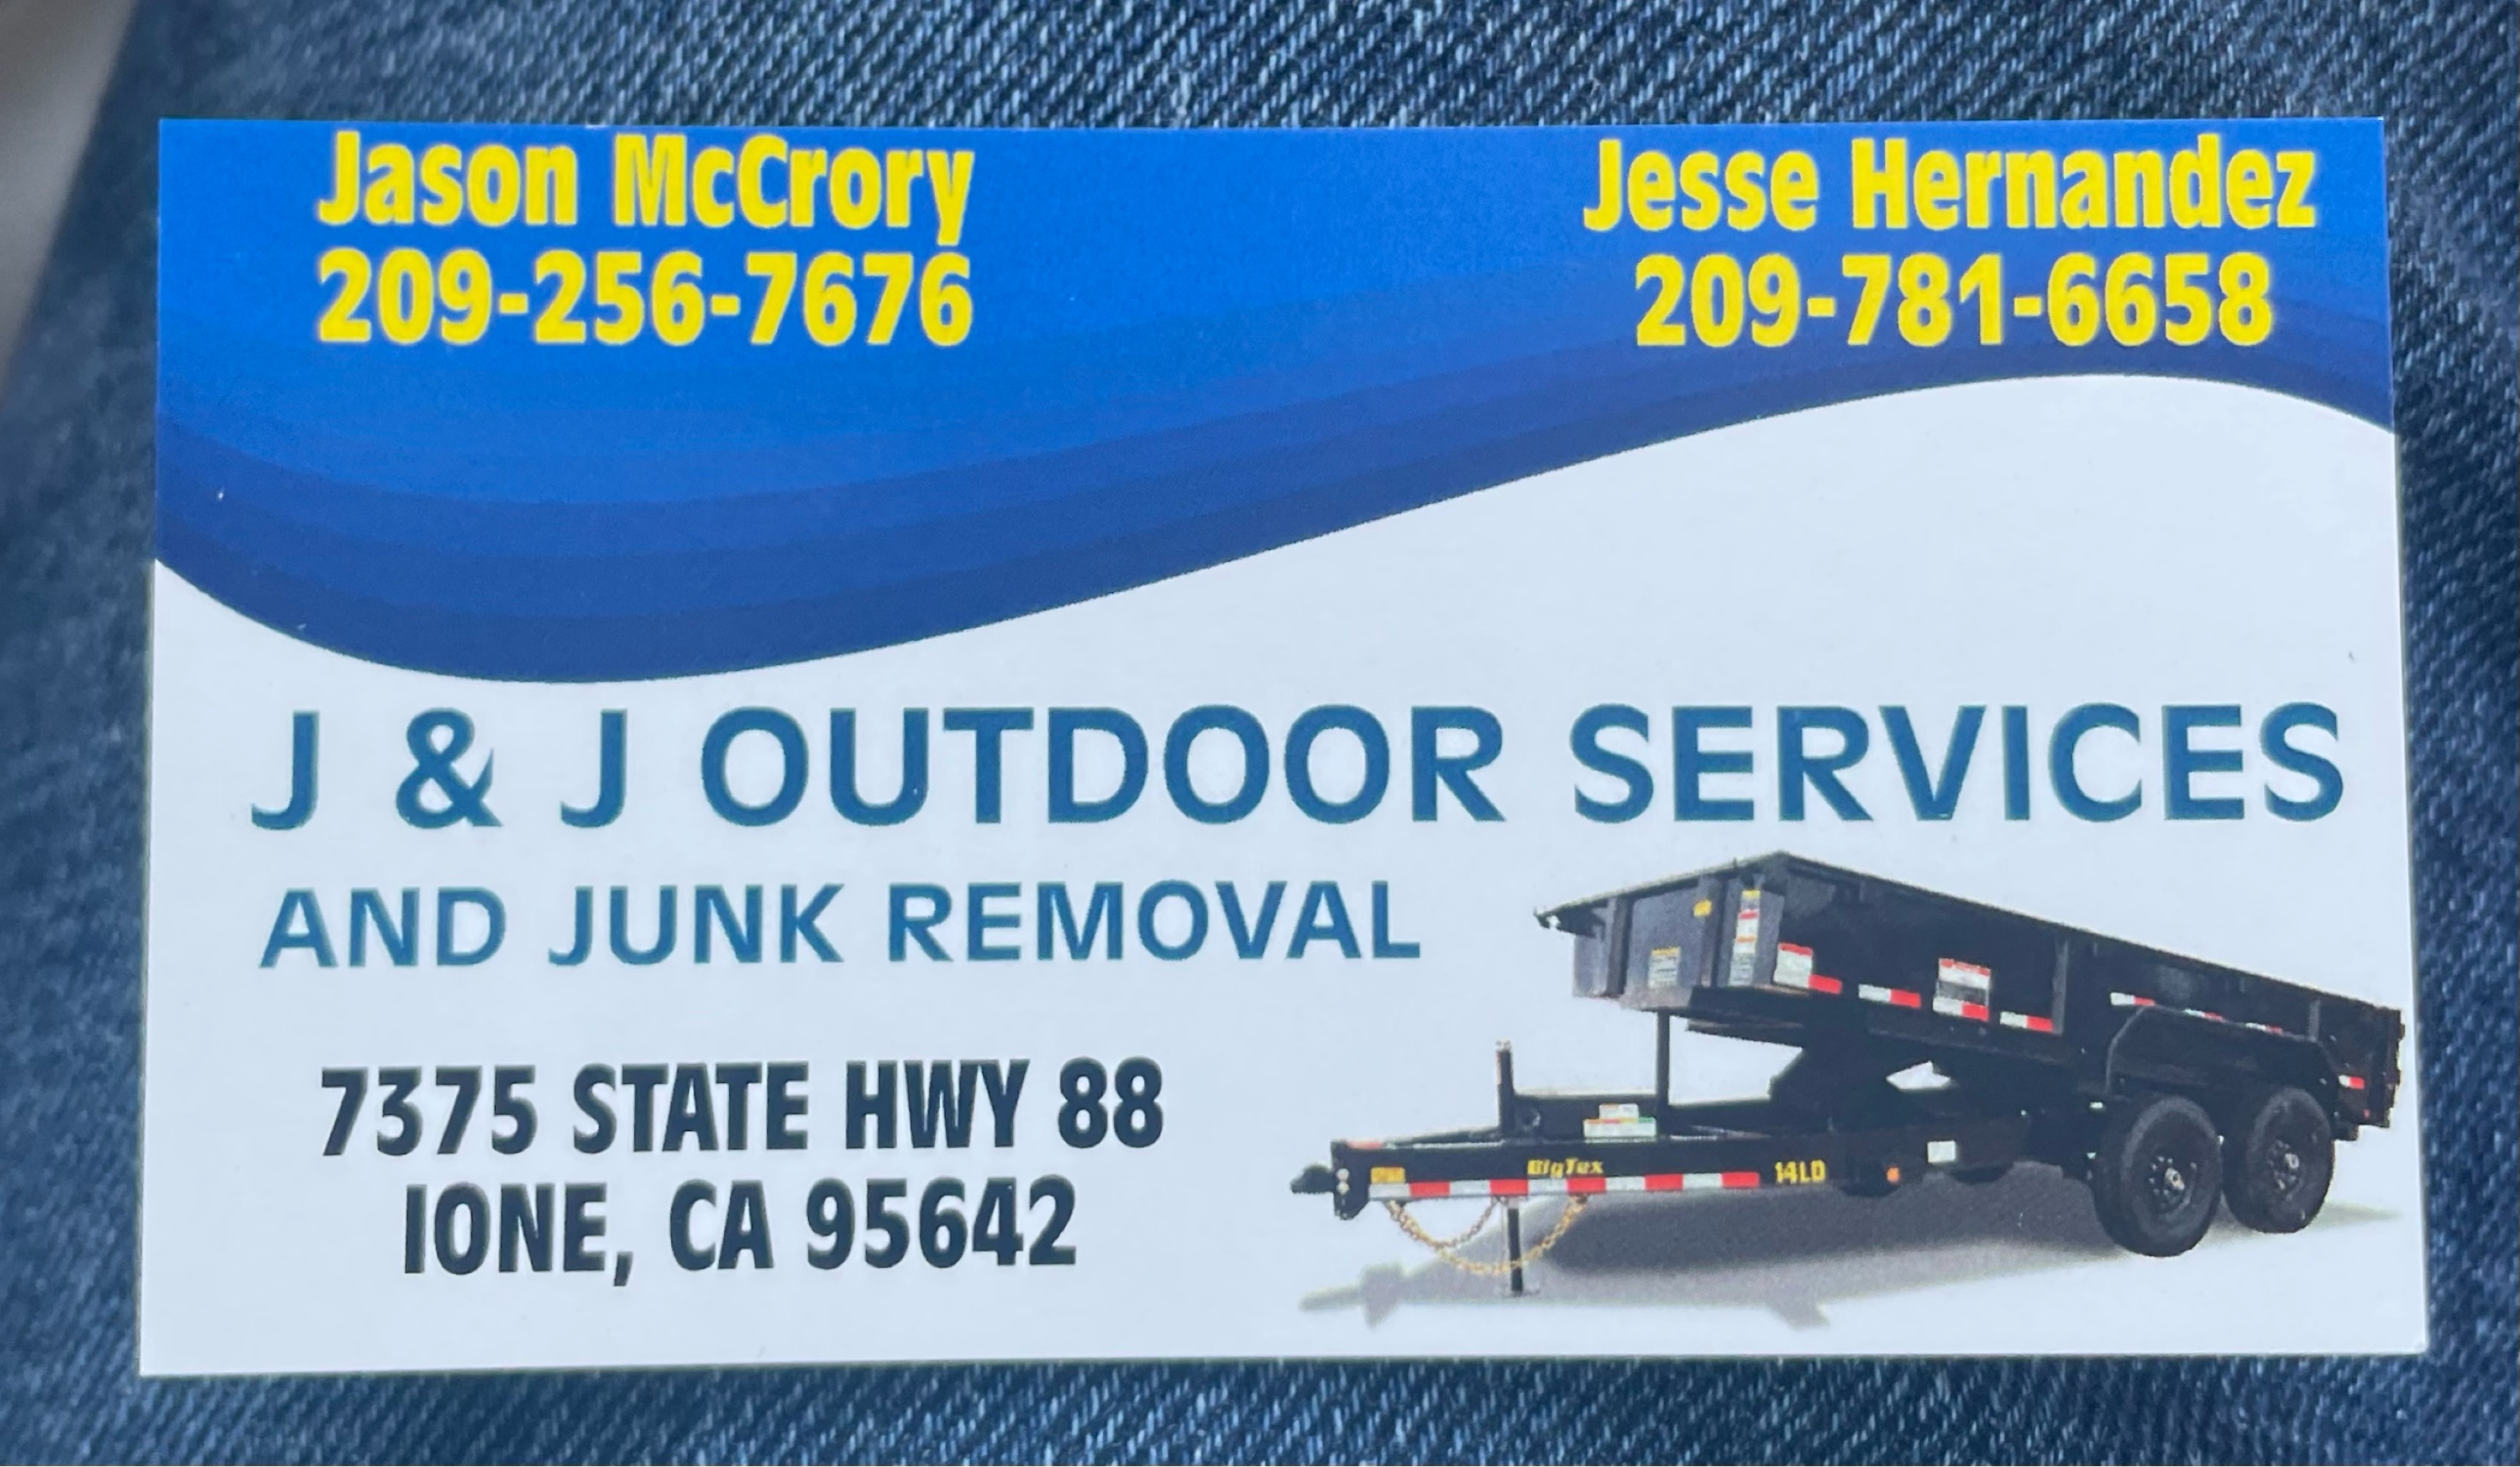 J & J Outdoor Services and Junk Removal Logo